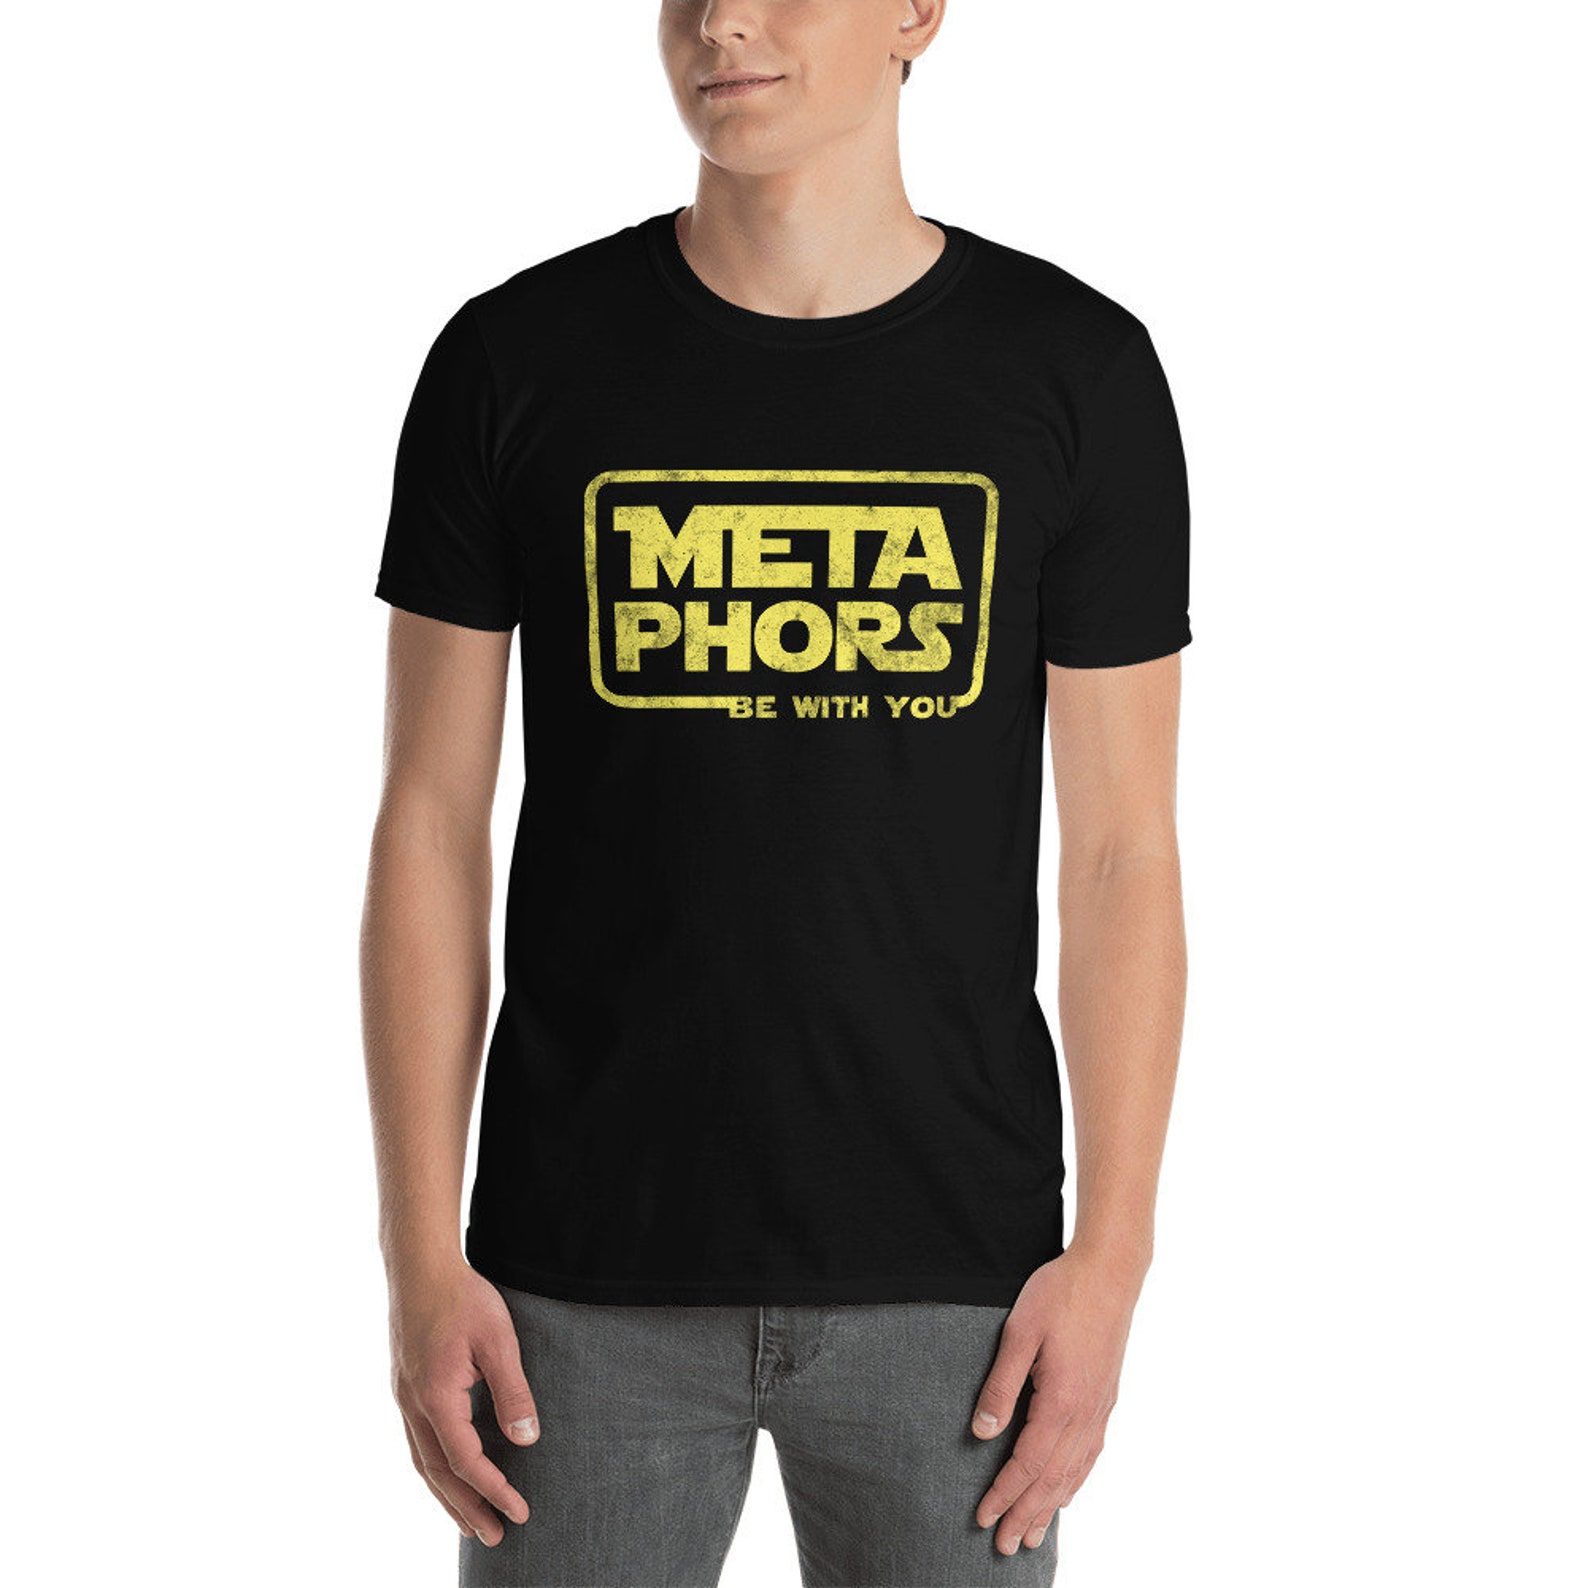 A black t-shirt with the words "Metaphors be with you" styled like the Star Wars logo